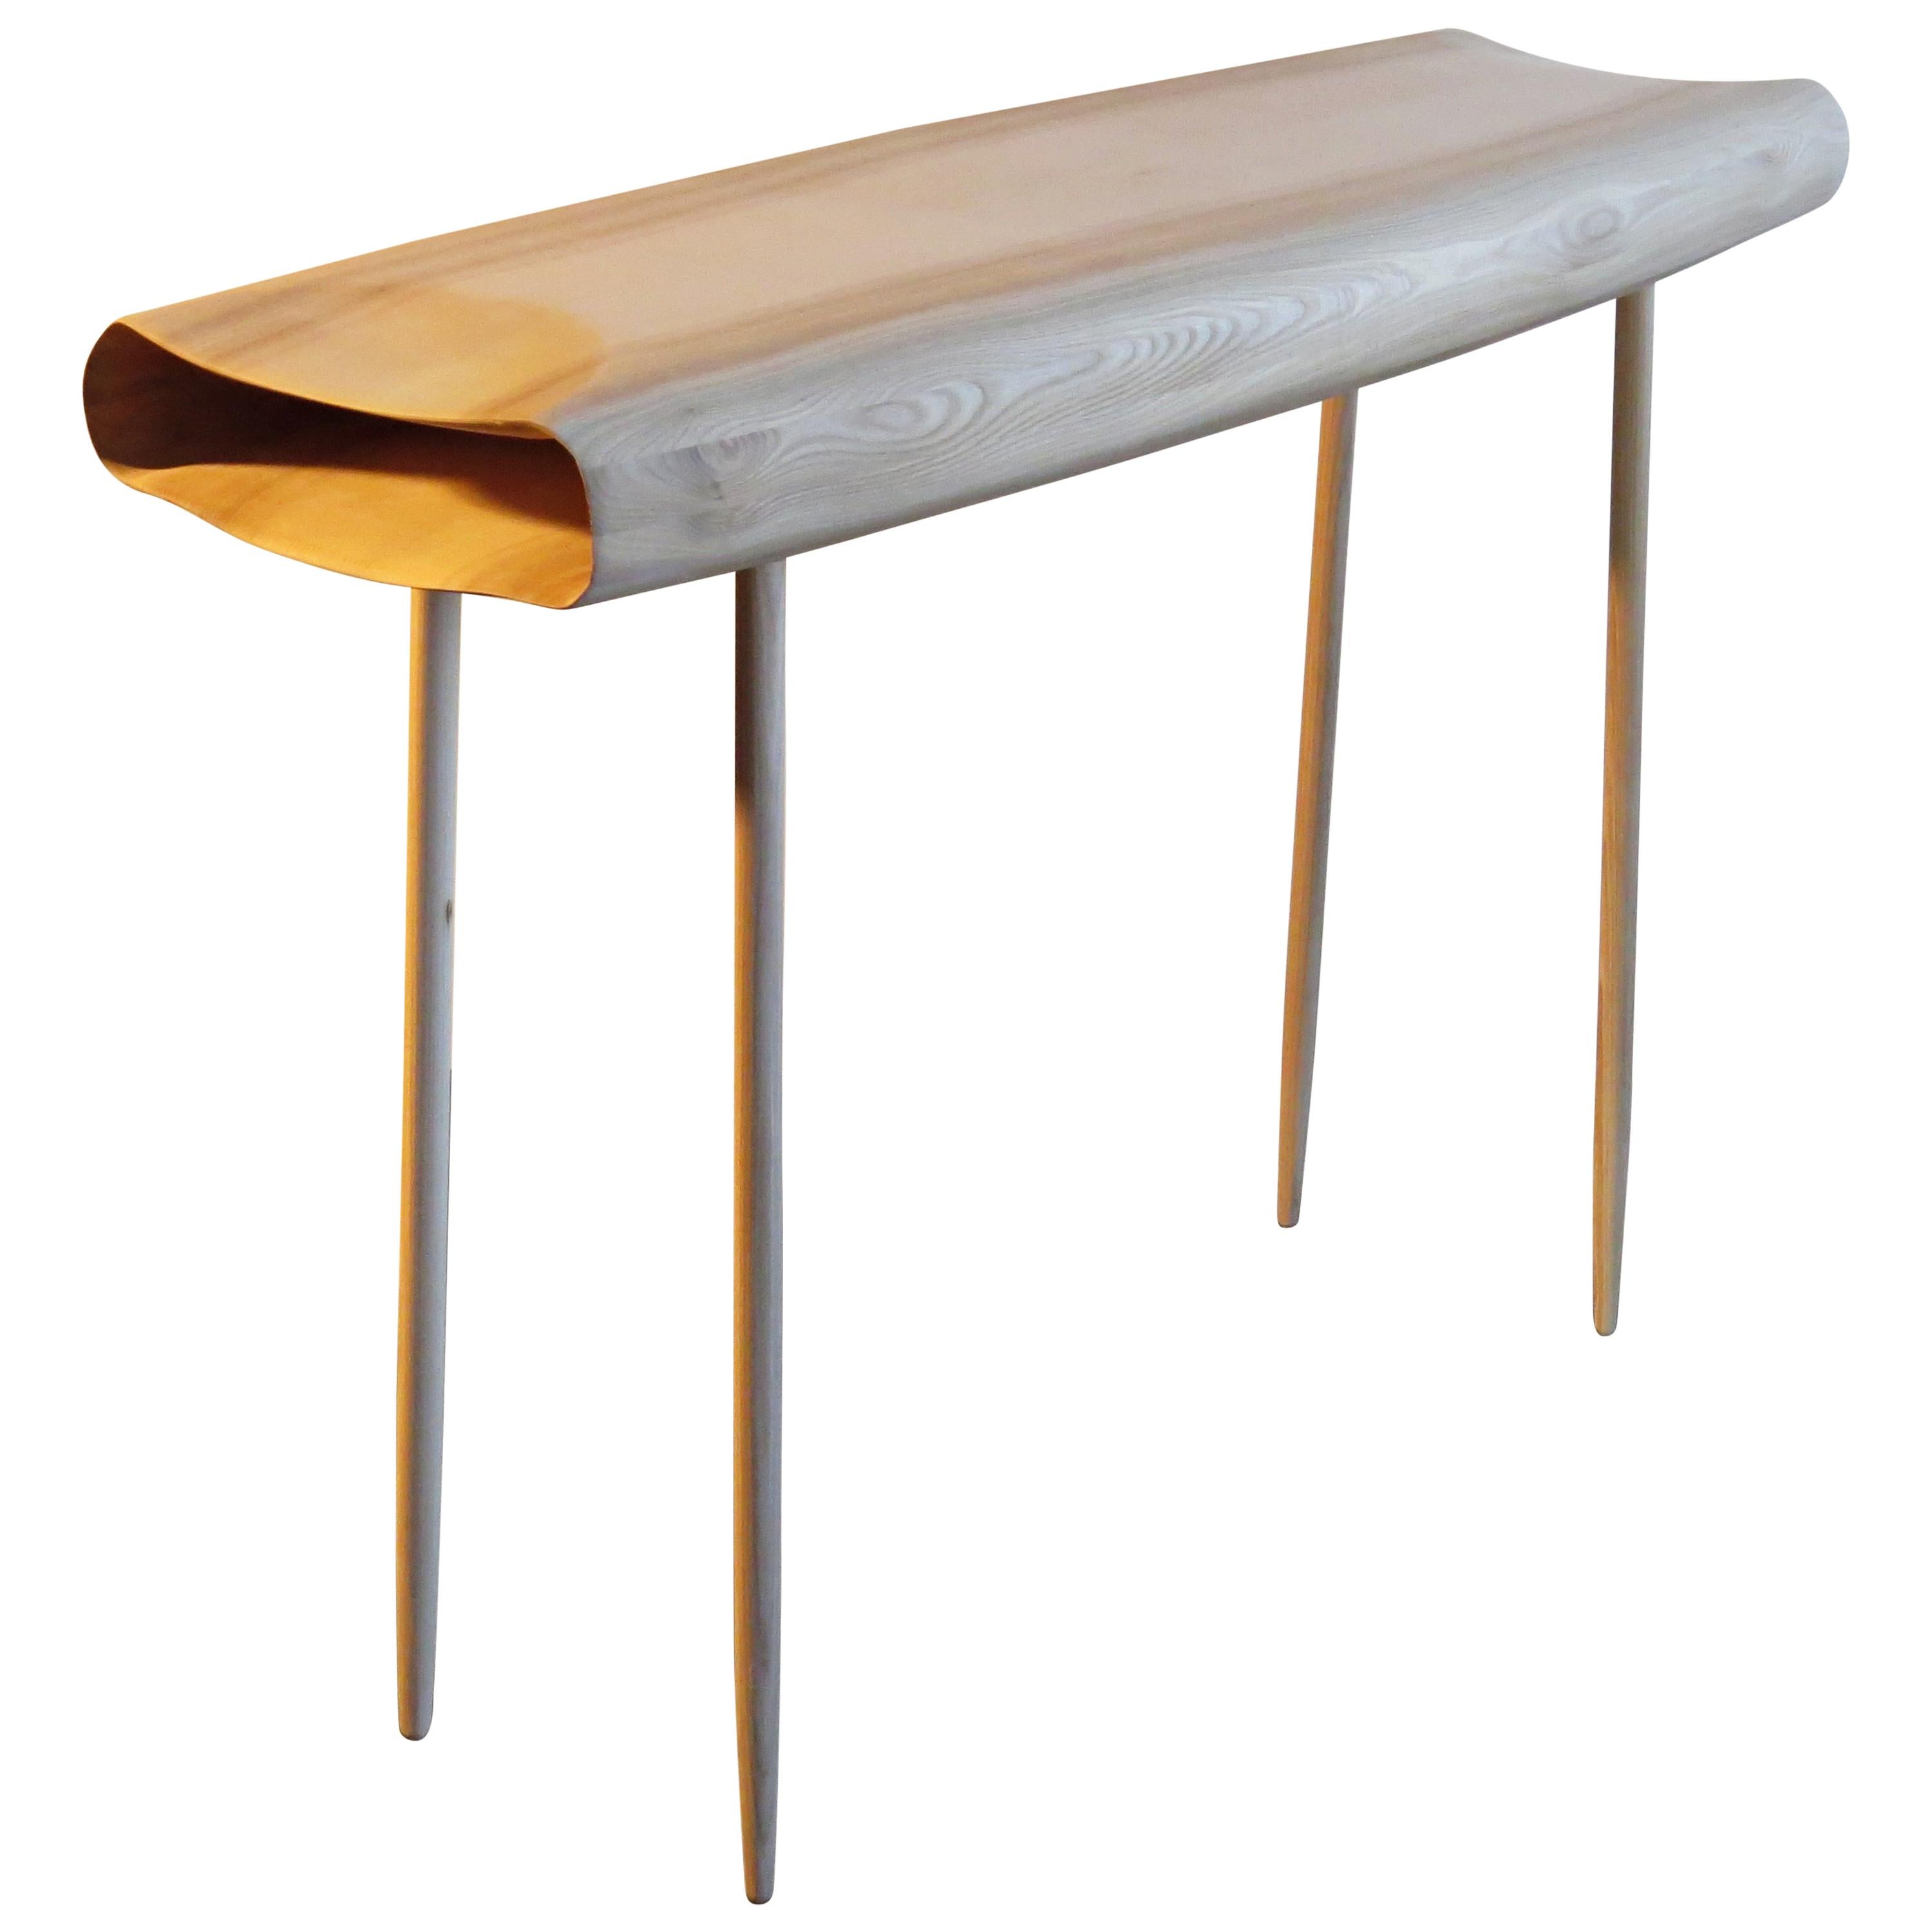 Console "Cloud" Solid Wood, Organic Design, Made to Measure in Germany